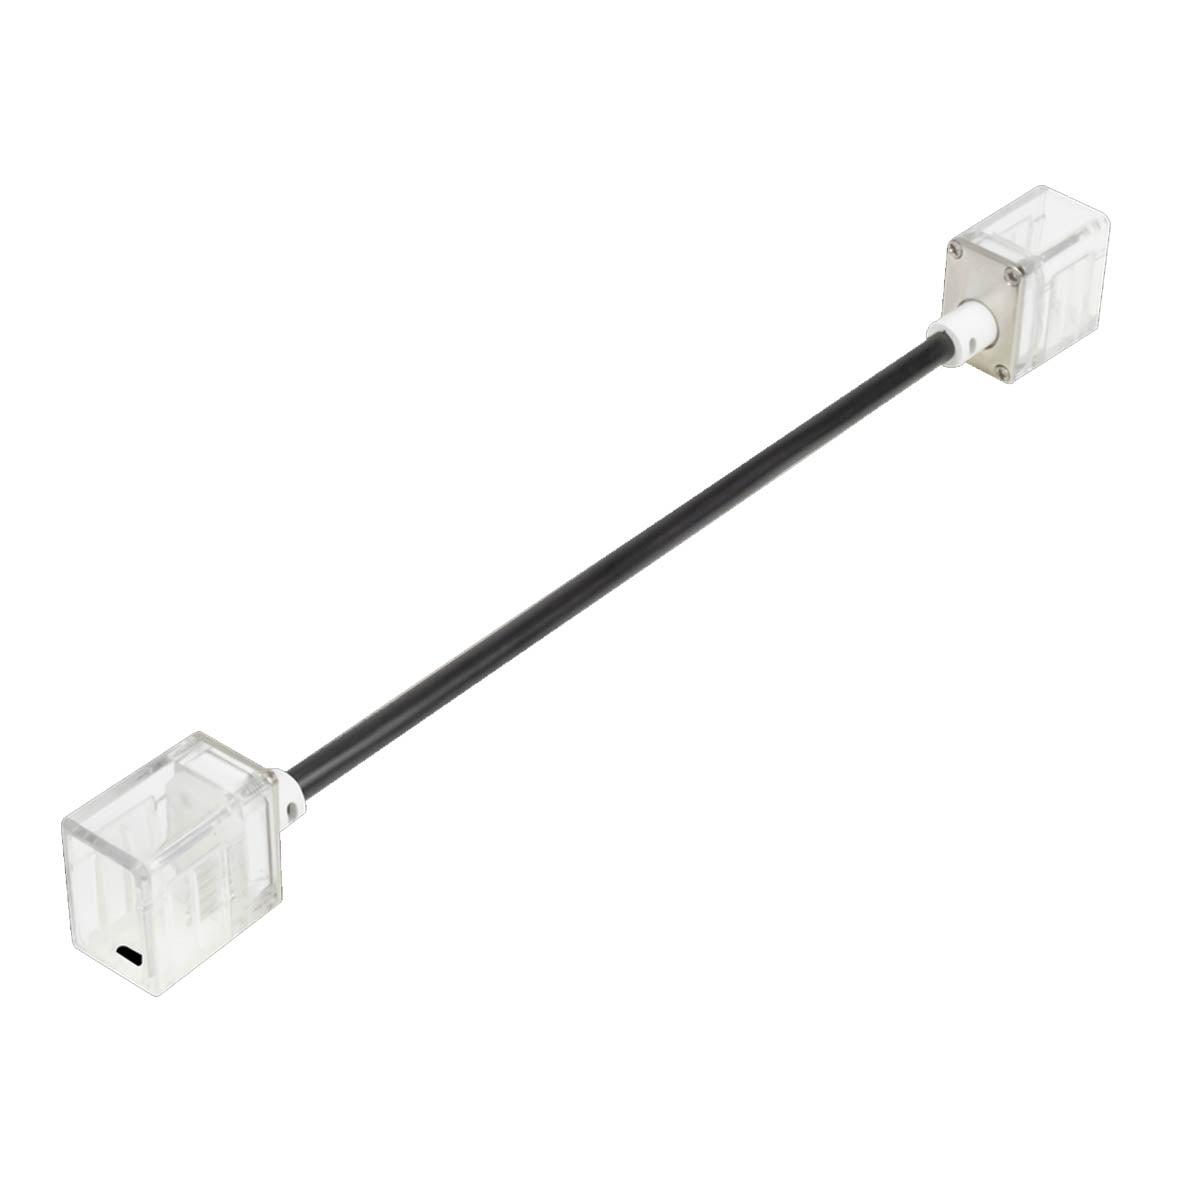 NeonFlex 24” Pro-L Linking Cable Front Feed (5-pin)